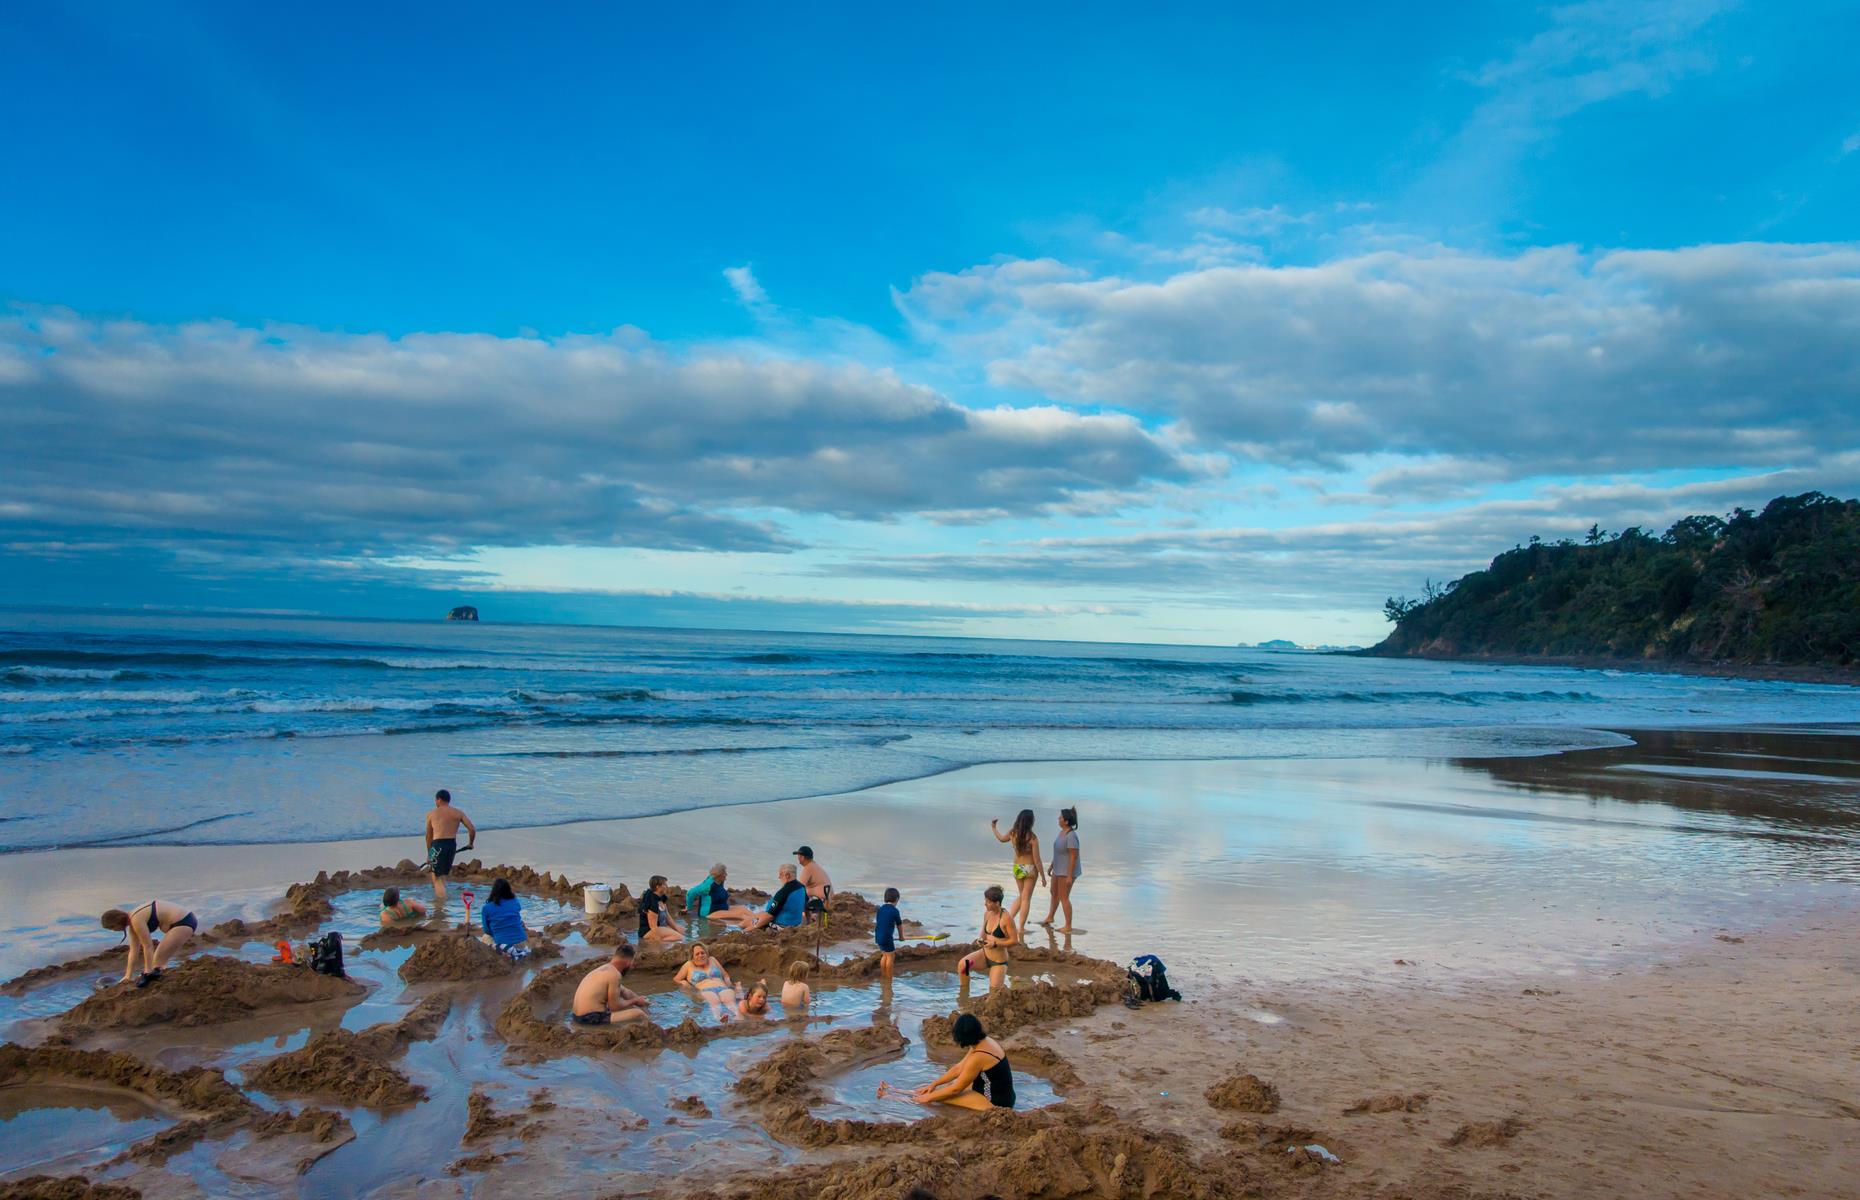 As thermal springs go, Hot Water Beach on North Island’s Coromandel Peninsula offers a unique experience. Here, geothermal waters bubble up through the sand – buy a spade, then hollow out a spot and relax as the warming waters gurgle around you. For the best experience, visit two hours either side of high tide.